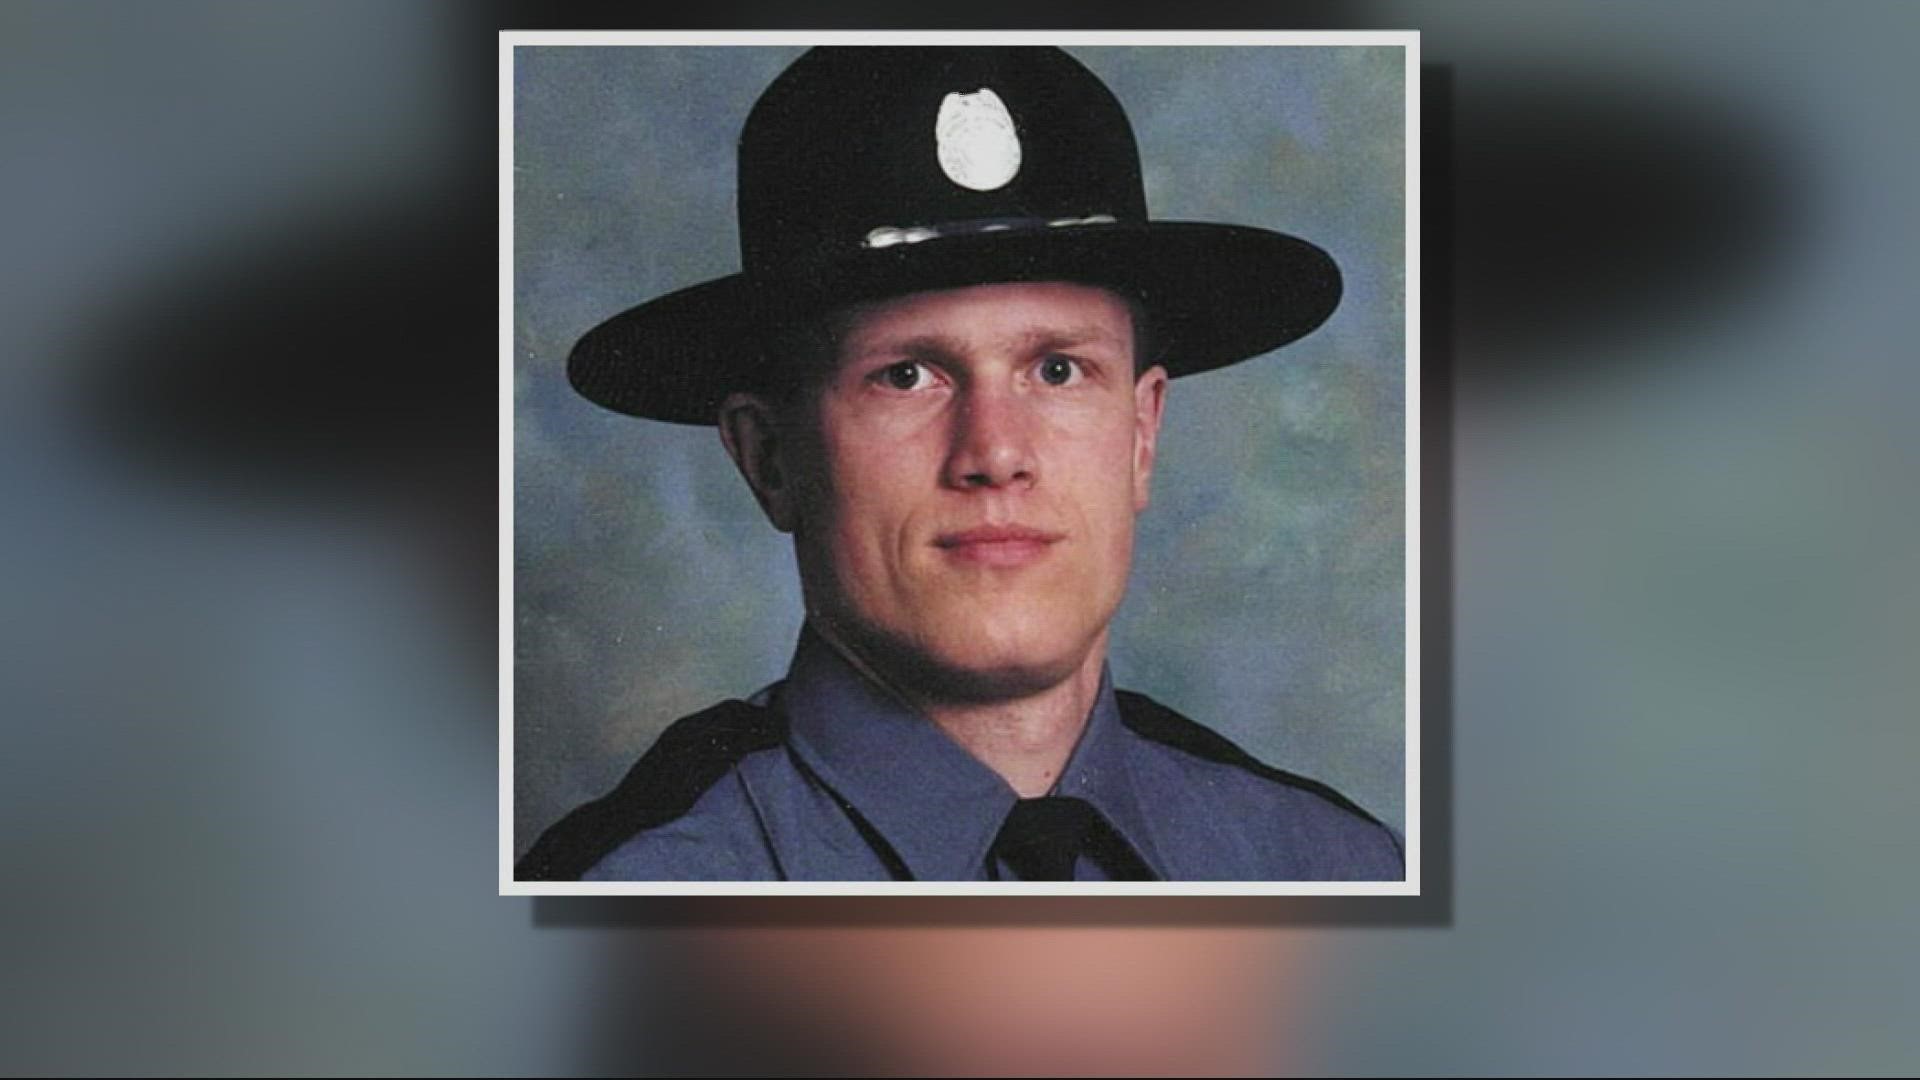 Sgt. John Burright passed away in May 2021 after being hit by a car nearly 20 years ago. A funeral service was held in honor of the husband and father of three.